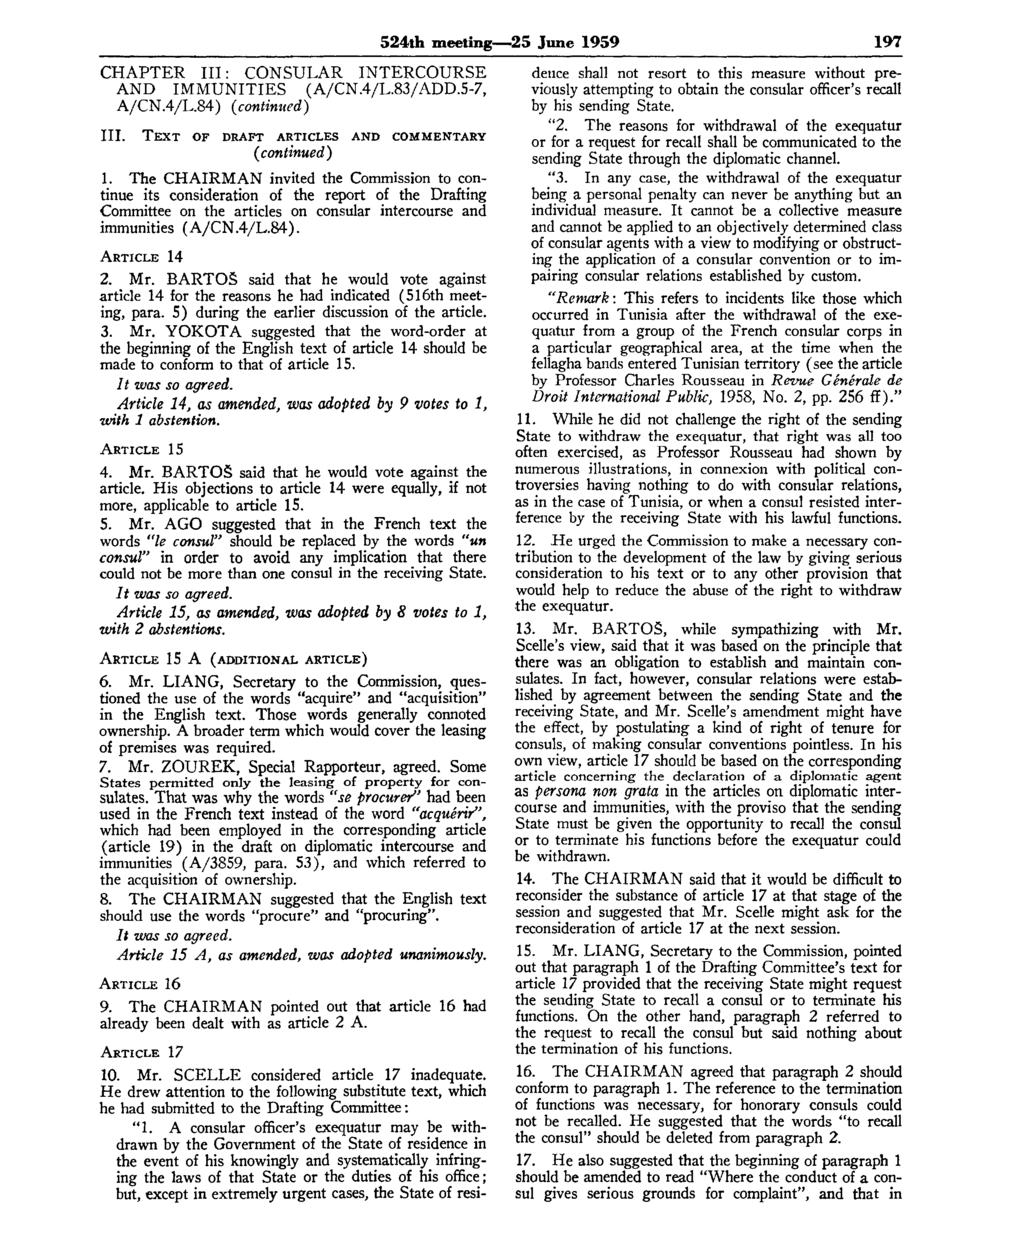 524th meeting 25 June 1959 197 CHAPTER III: CONSULAR INTERCOURSE AND IMMUNITIES (A/CN.4/L.83/ADD.5-7, A/CN.4/L.84) (continued) III. TEXT OF DRAFT ARTICLES AND COMMENTARY (continued) 1.